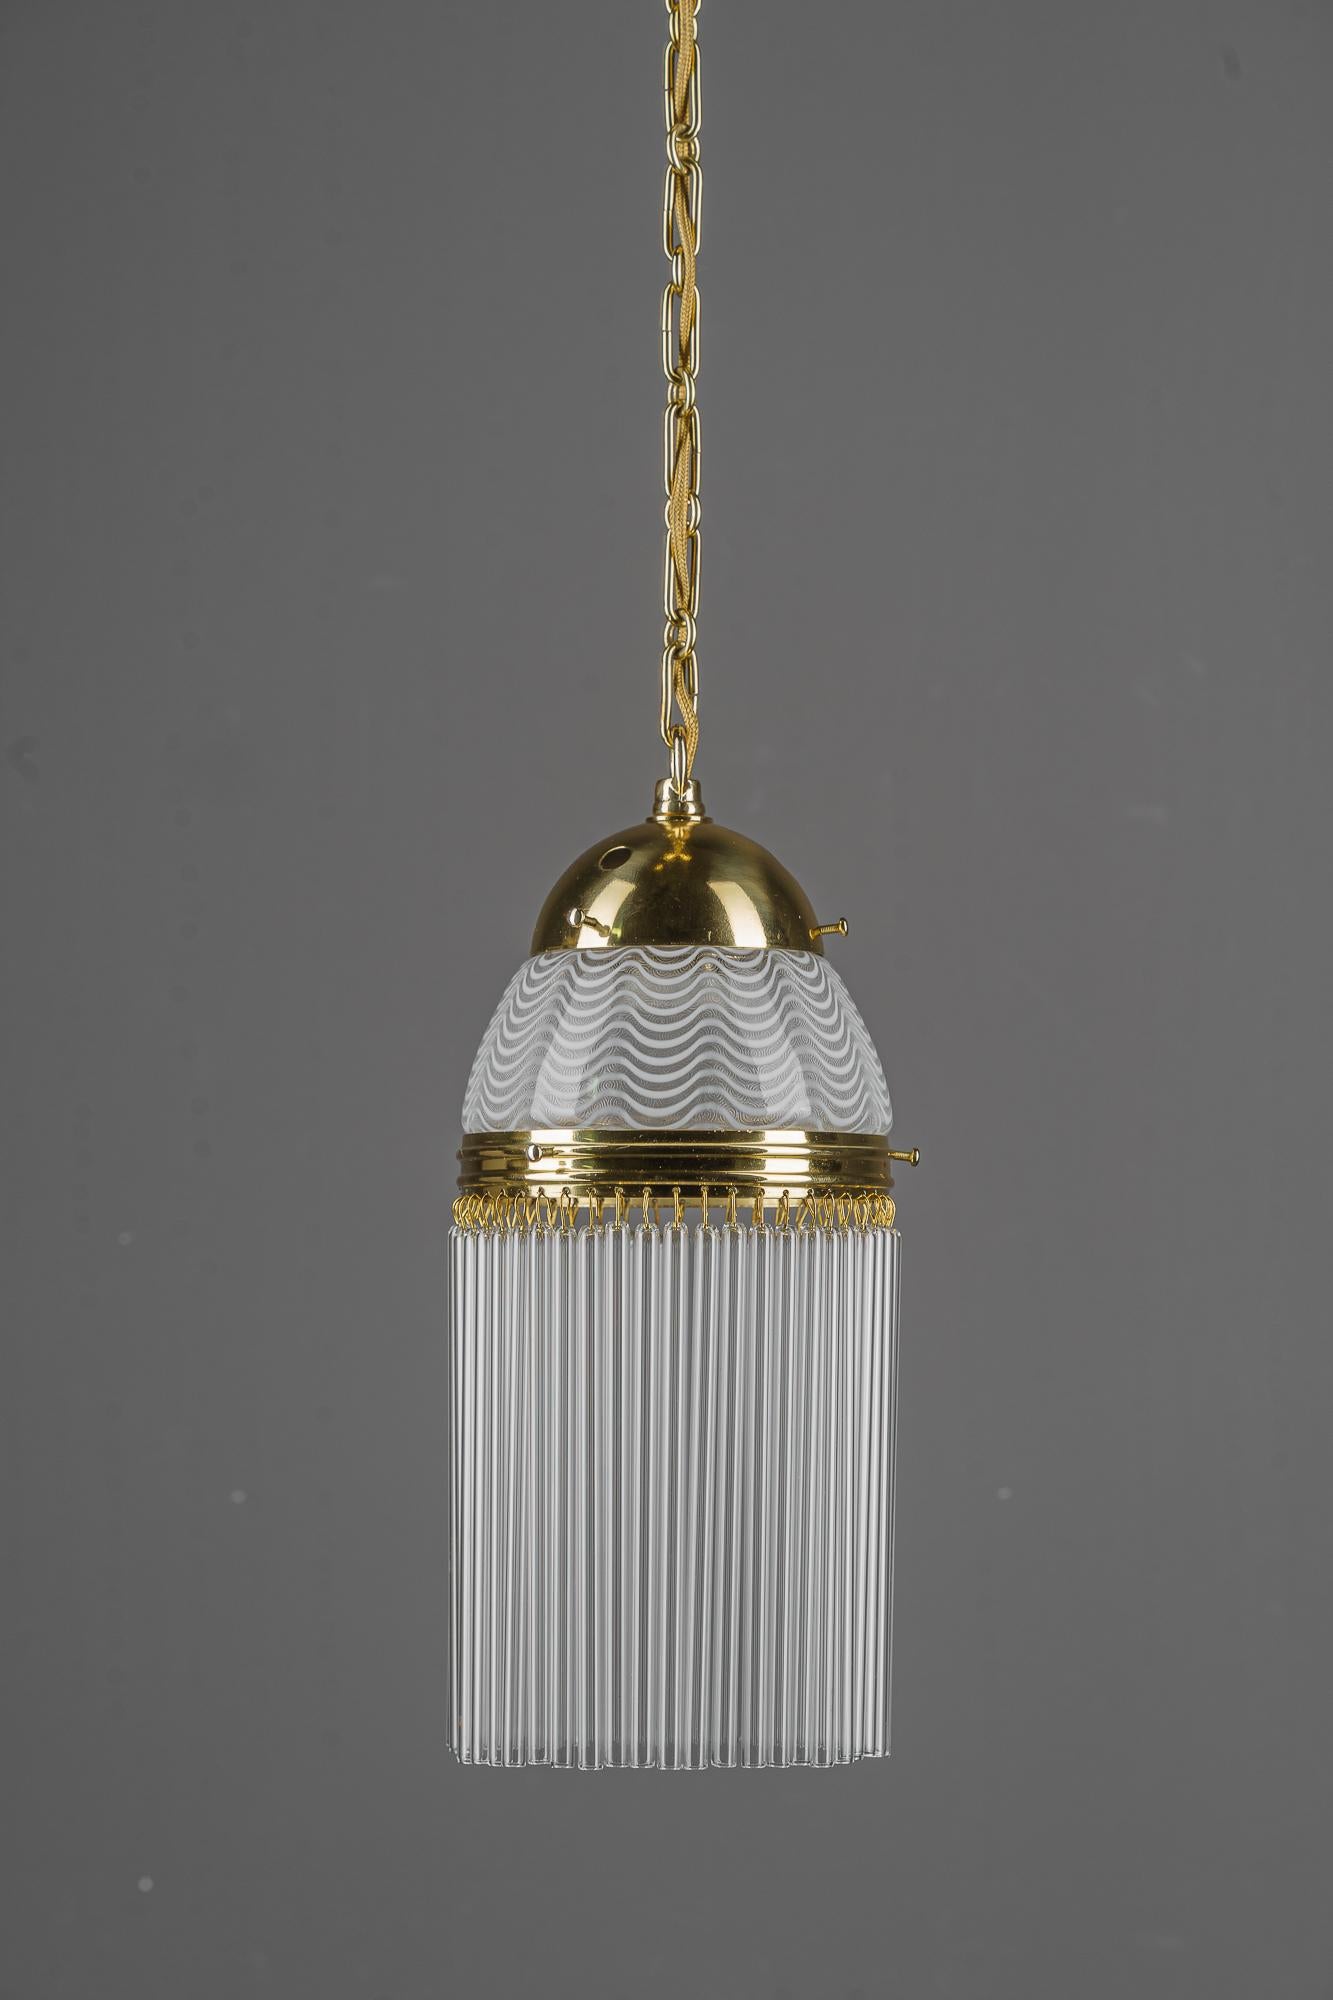 Art Deco pendant around 1920s with opaline glass shade vienna 1920s
Brass polished and stove enameled
Beautiful antique opaline glass shade
The glass sticks are replaced ( new )